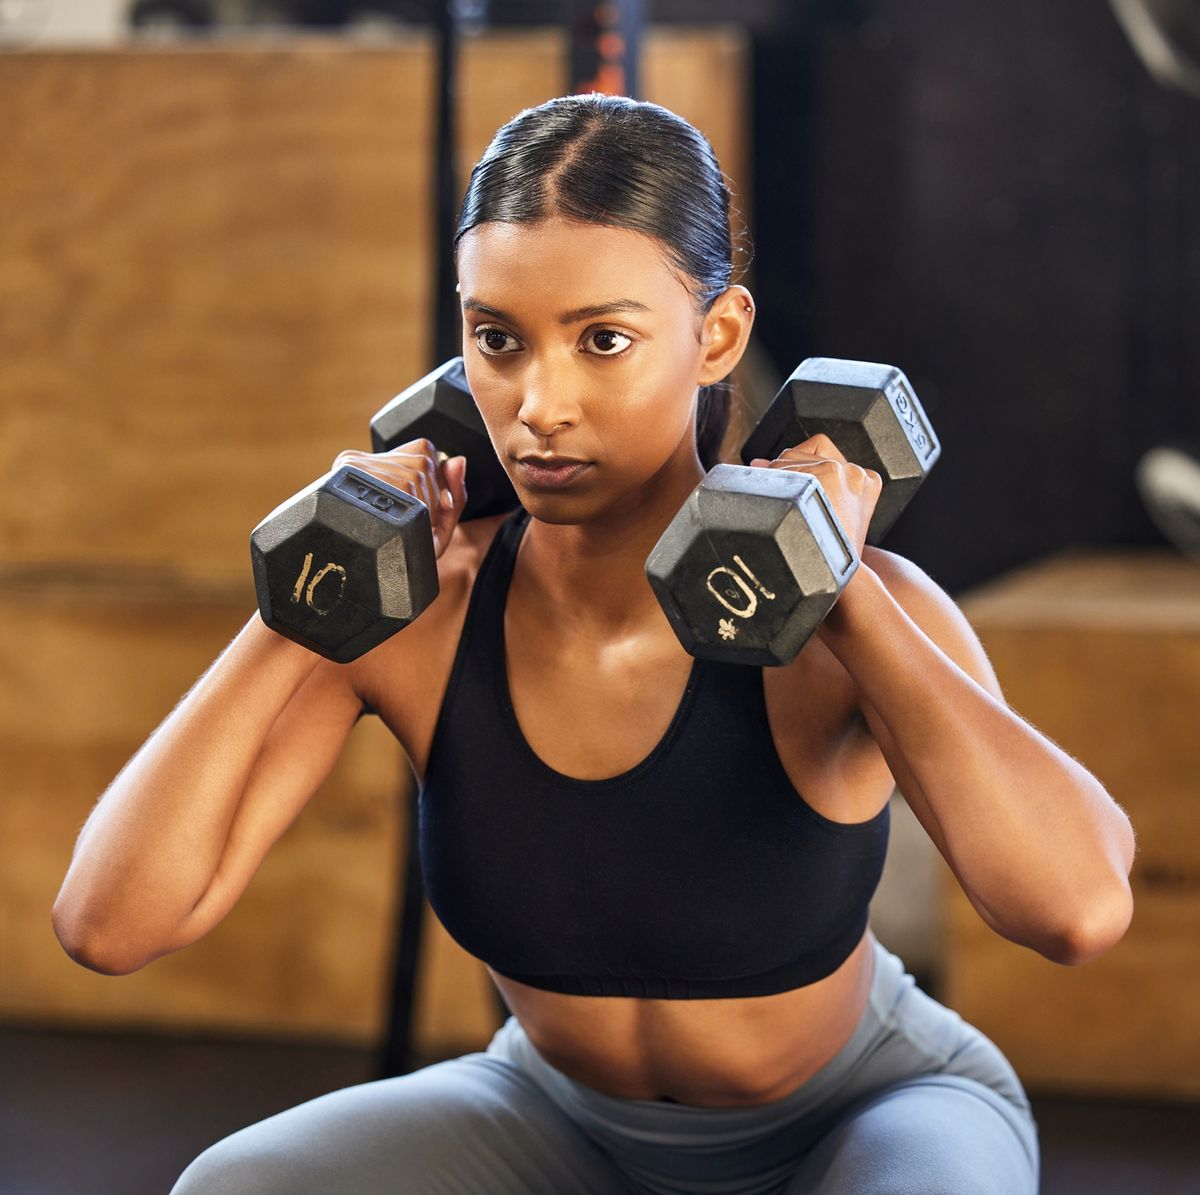 Fitness woman exercising with dumbbells. Beautiful fitness